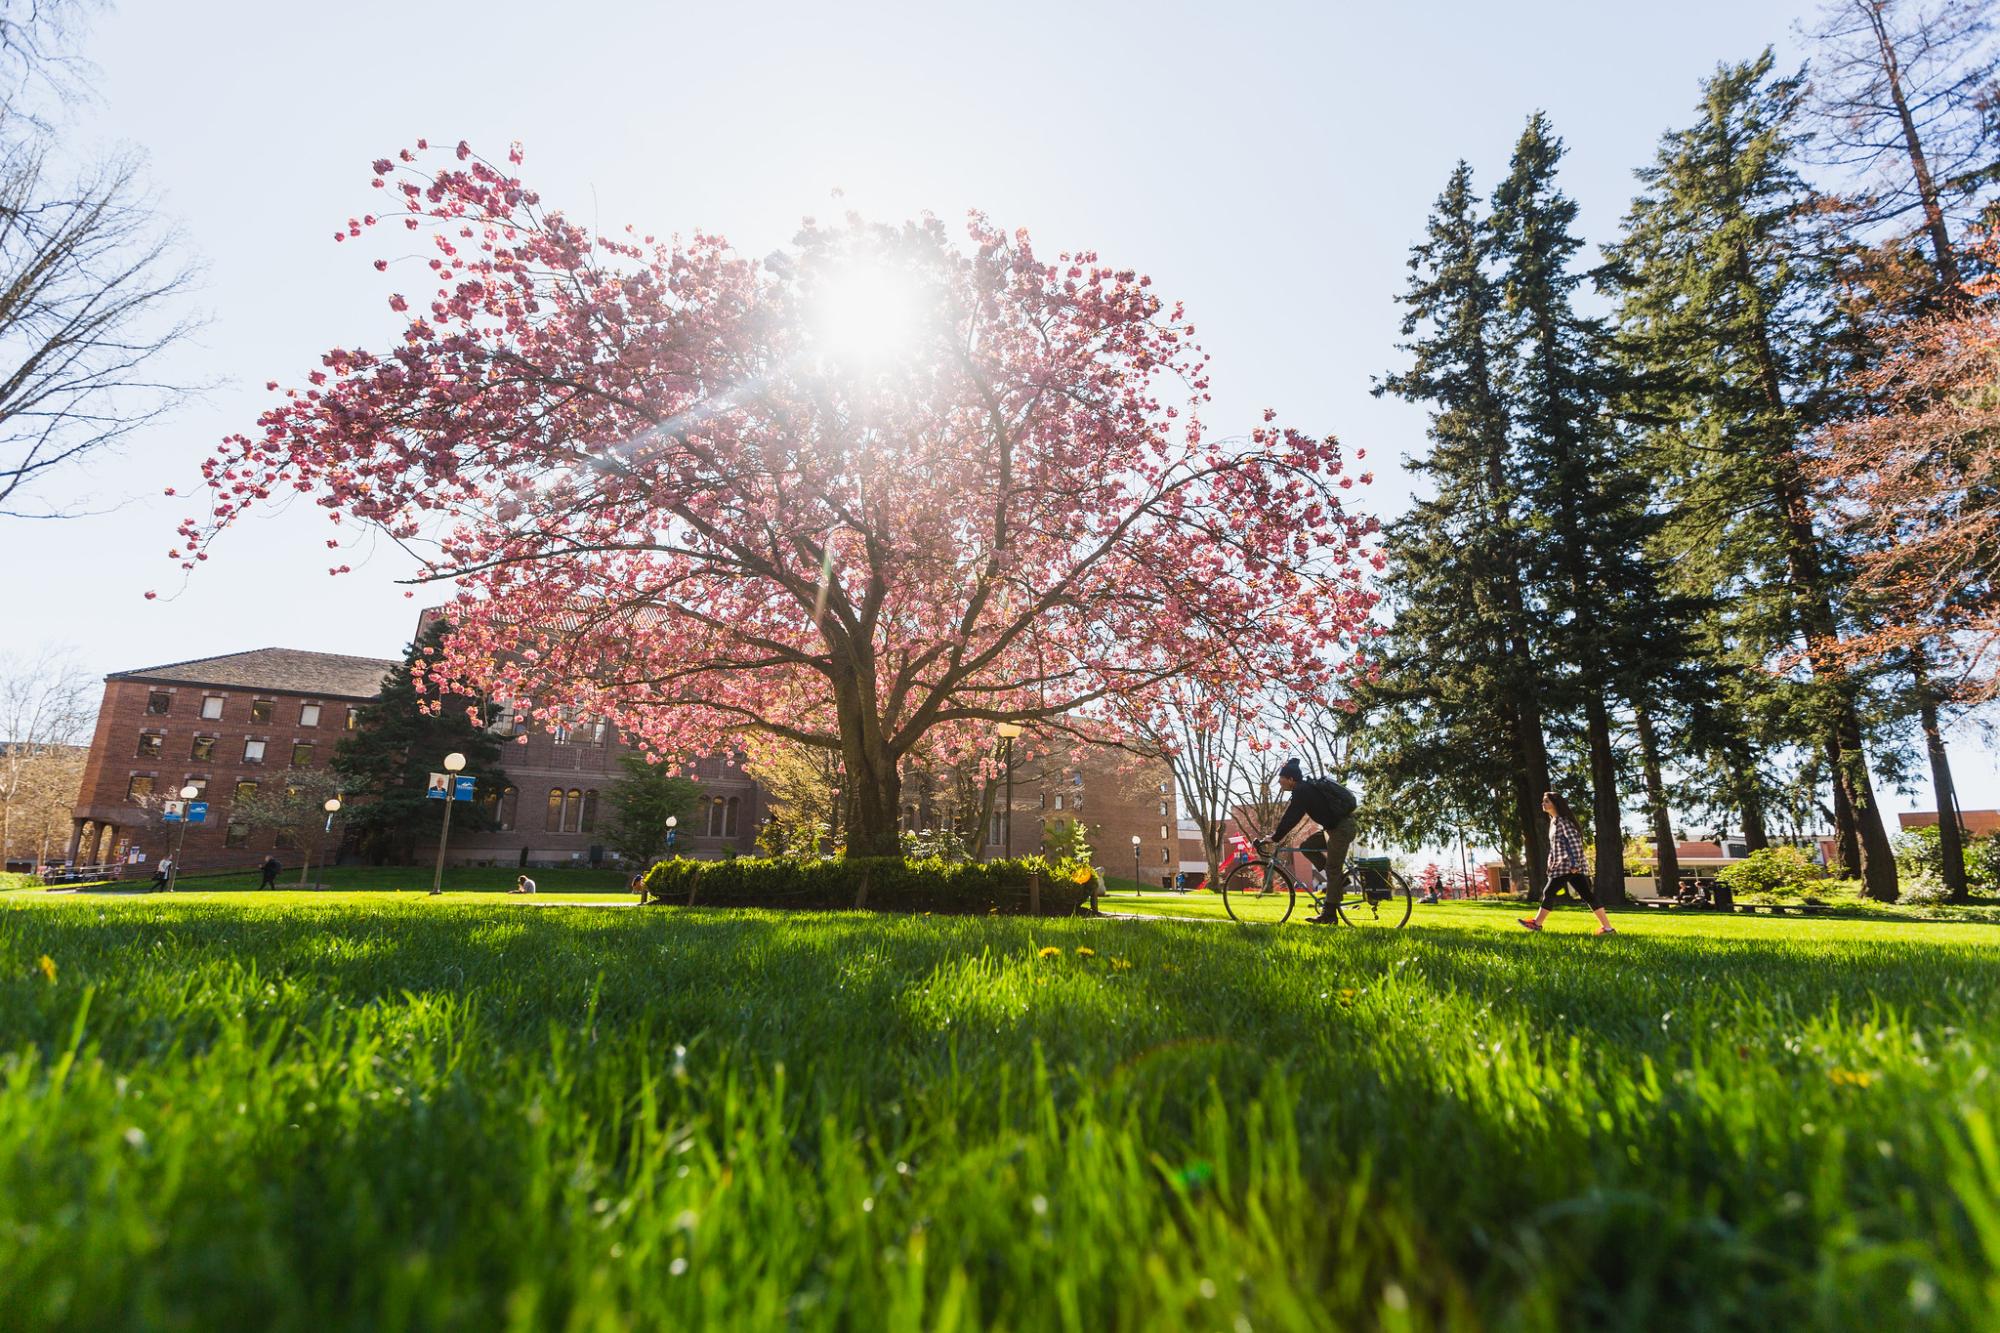 A cherry tree in bloom on Old Main Lawn at WWU